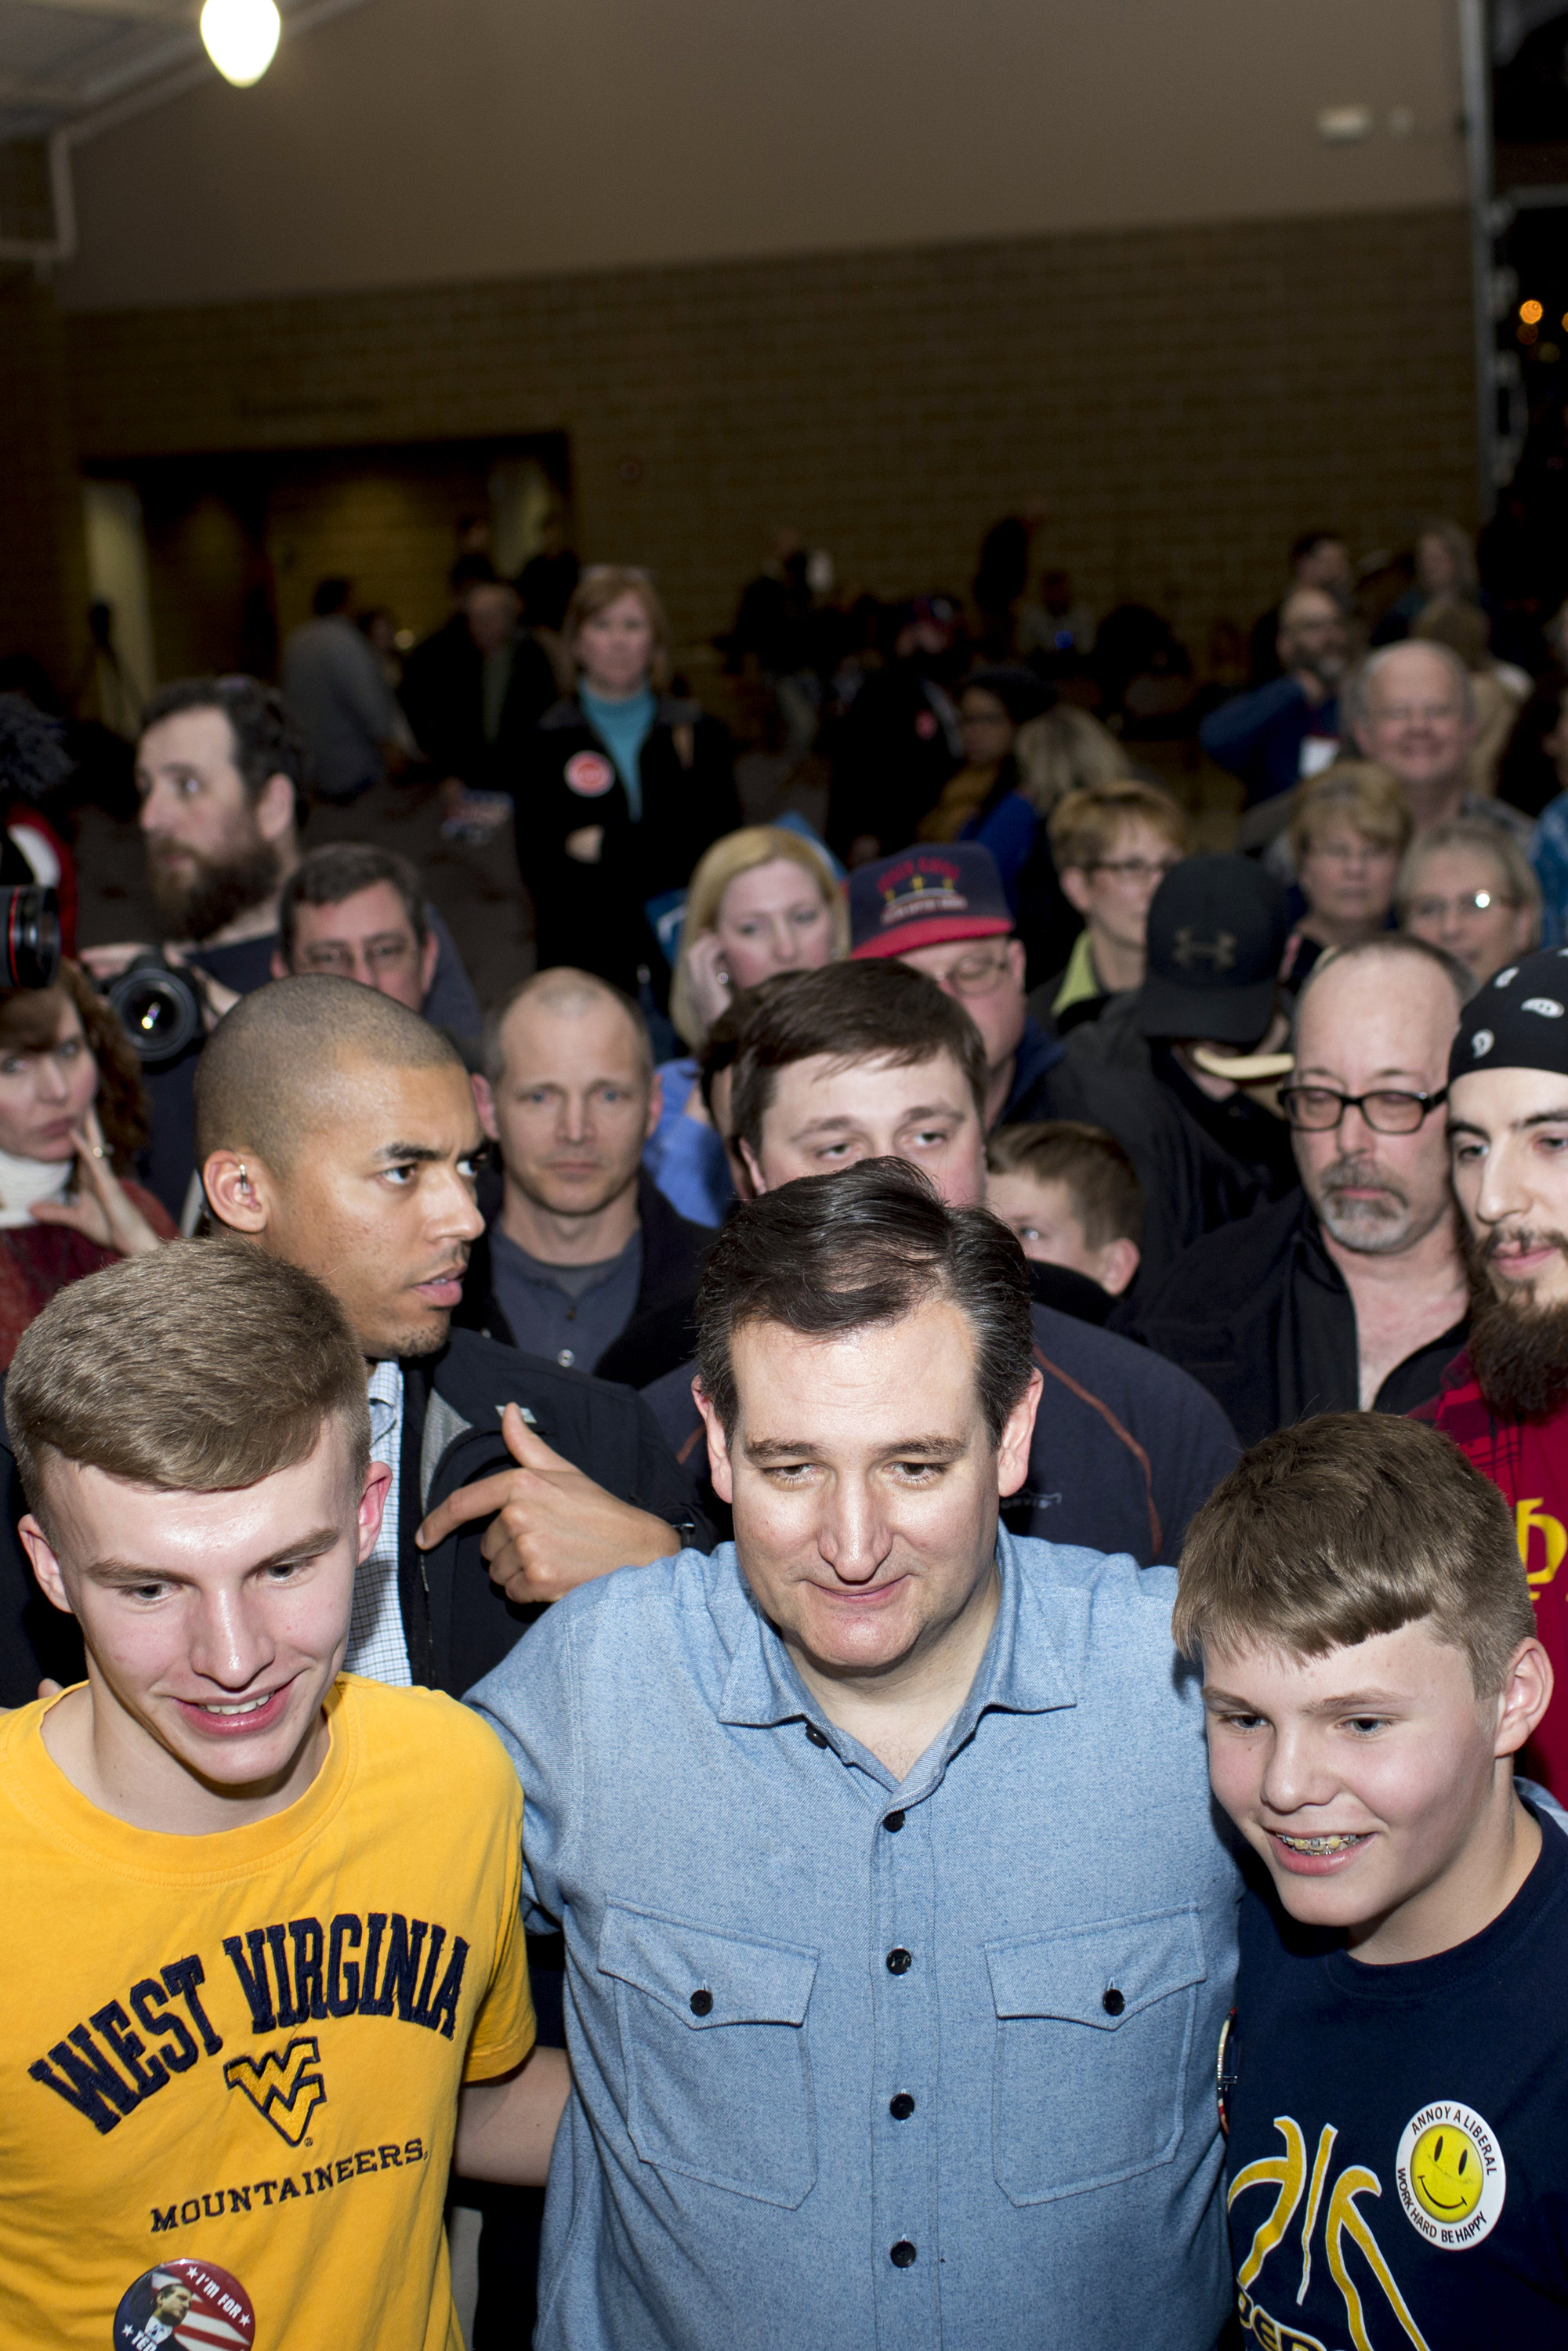 Ted Cruz greets supporters at his rally in Des Moines, Iowa on Jan. 31, 2016.